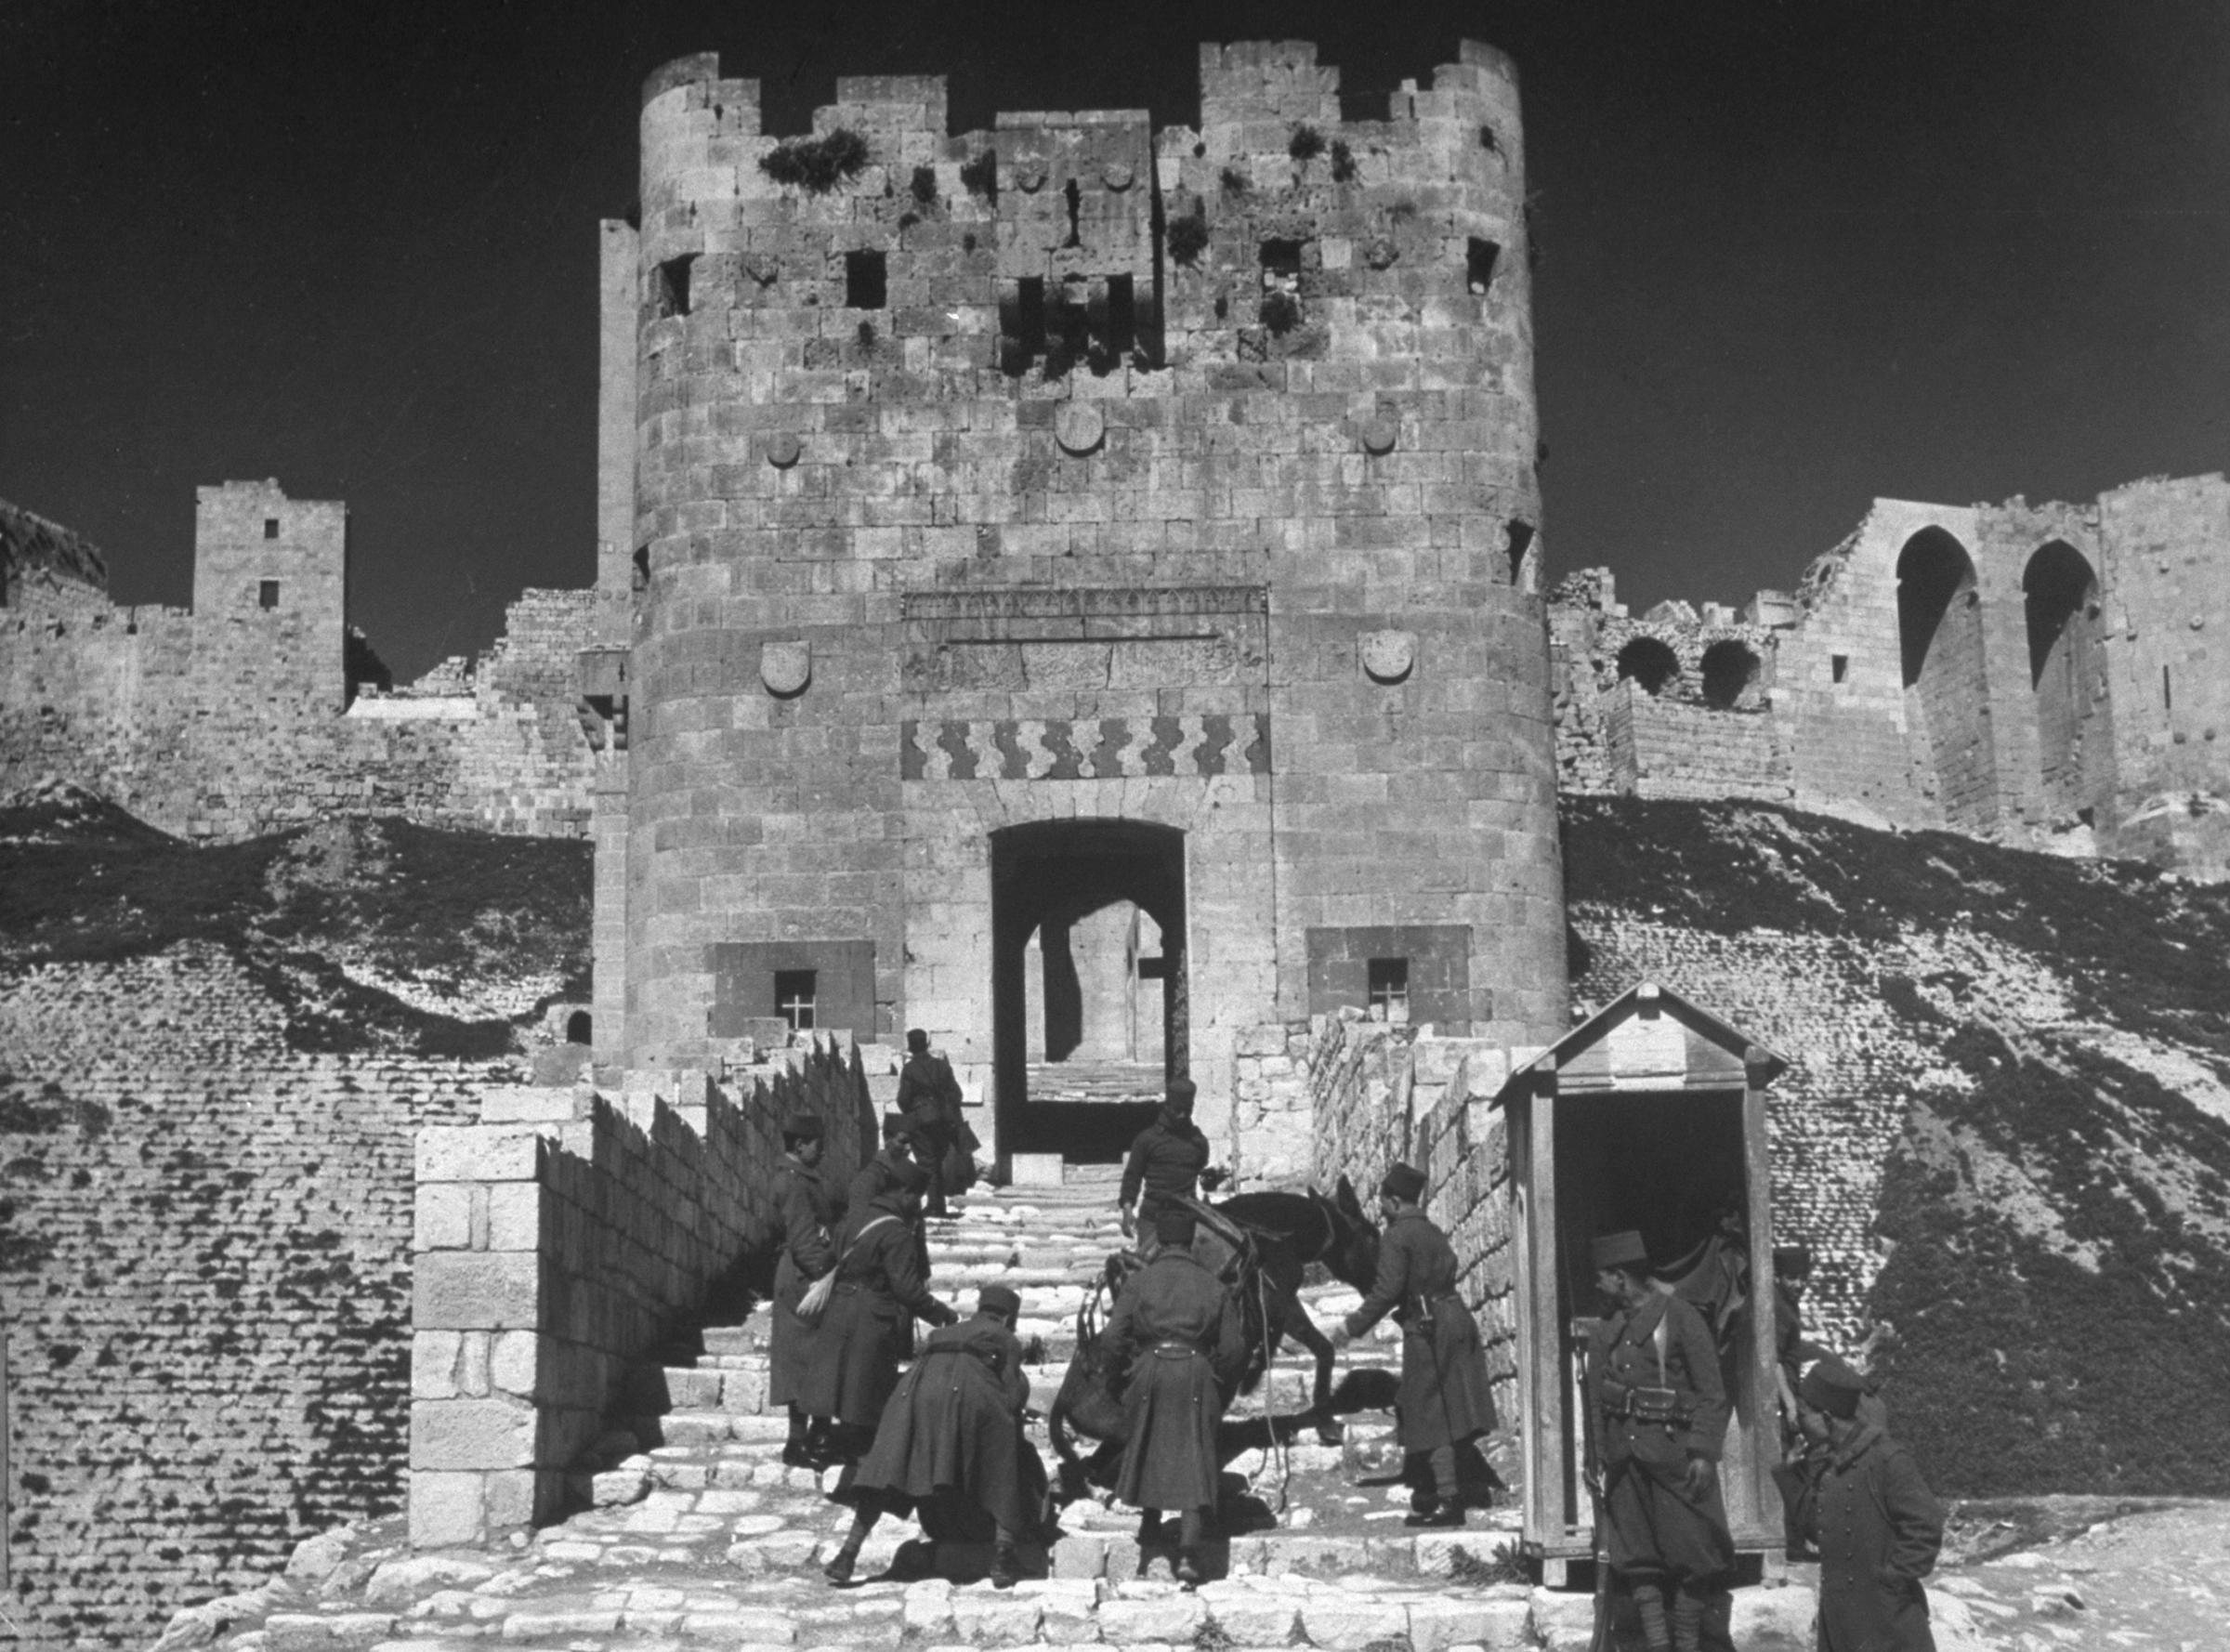 Soldiers urge a mule up the steps of the citadel at Aleppo, Syria, 1940.